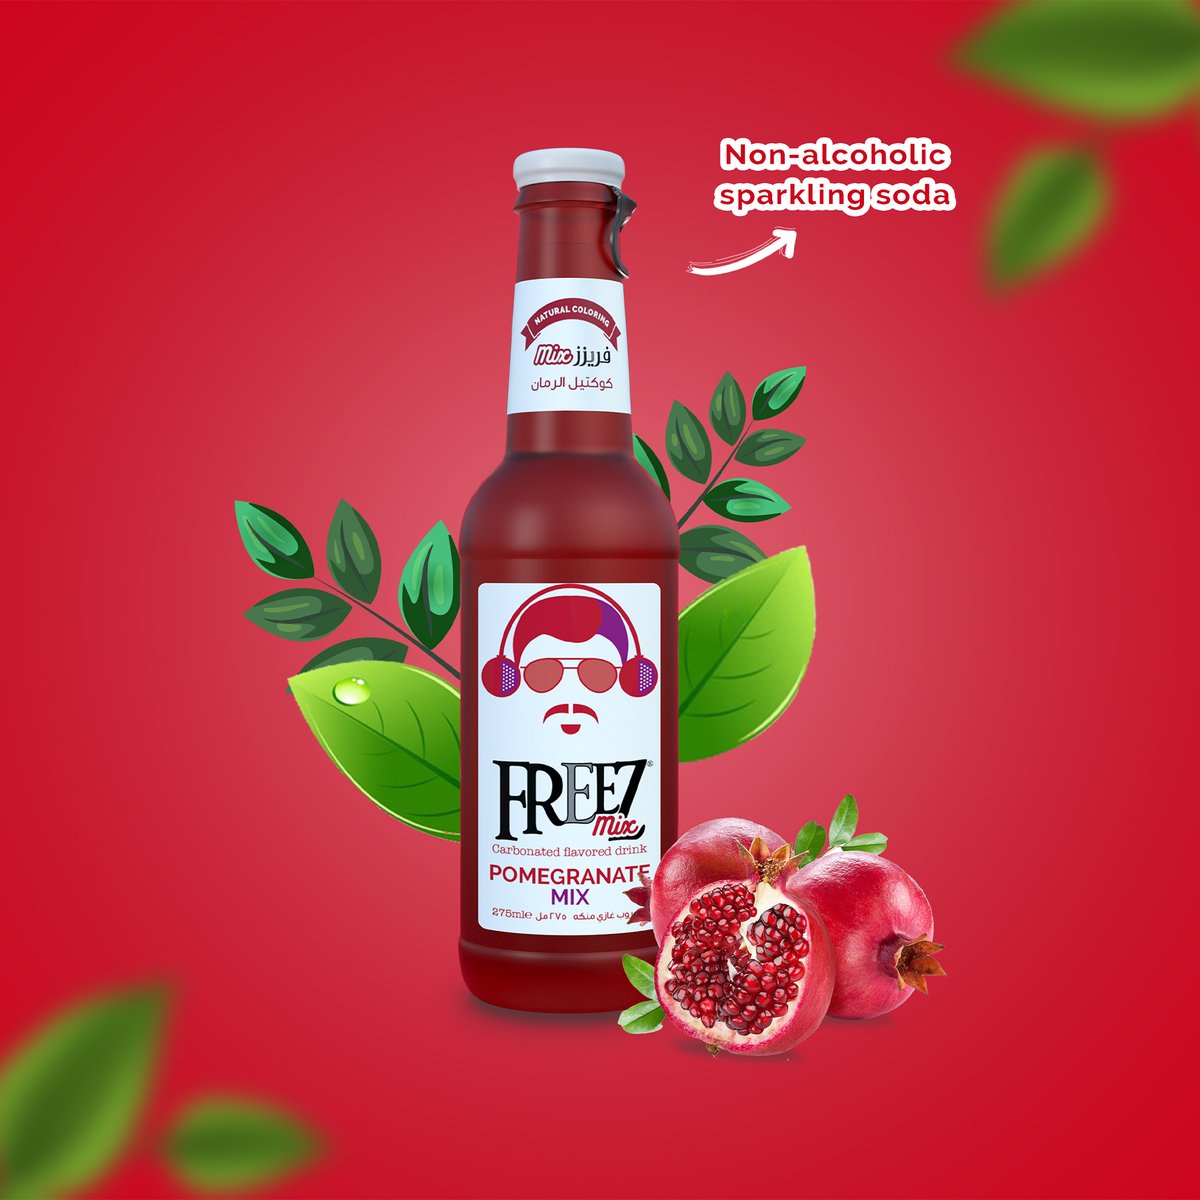 Freez Pomegranate Mix Carbonated Flavoured Drink 6 x 275 ml